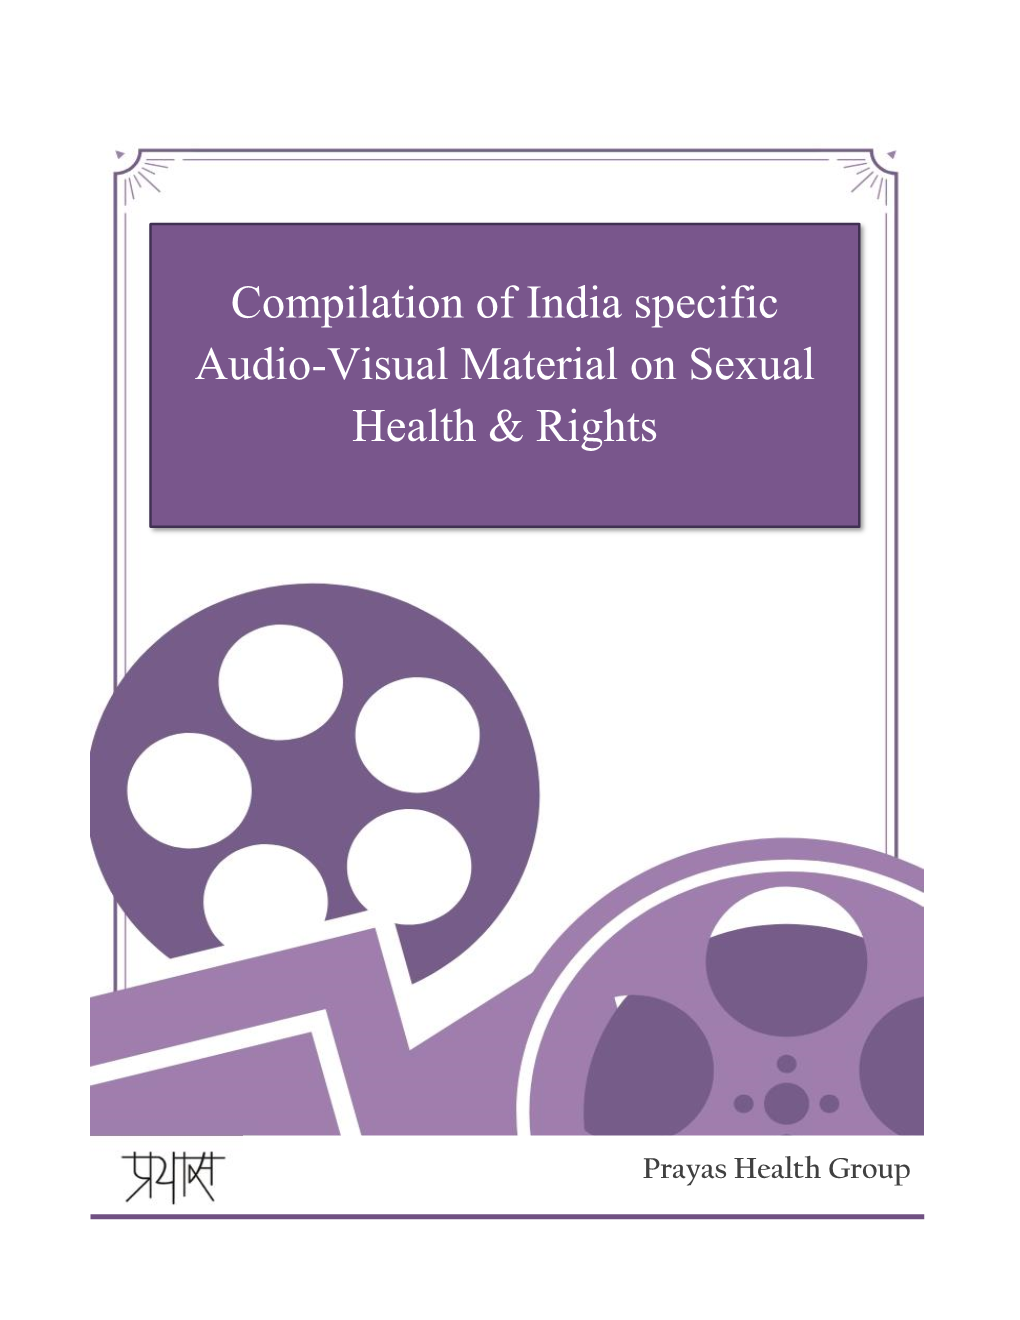 Compilation of India Specific Audio-Visual Material on Sexual Health & Rights